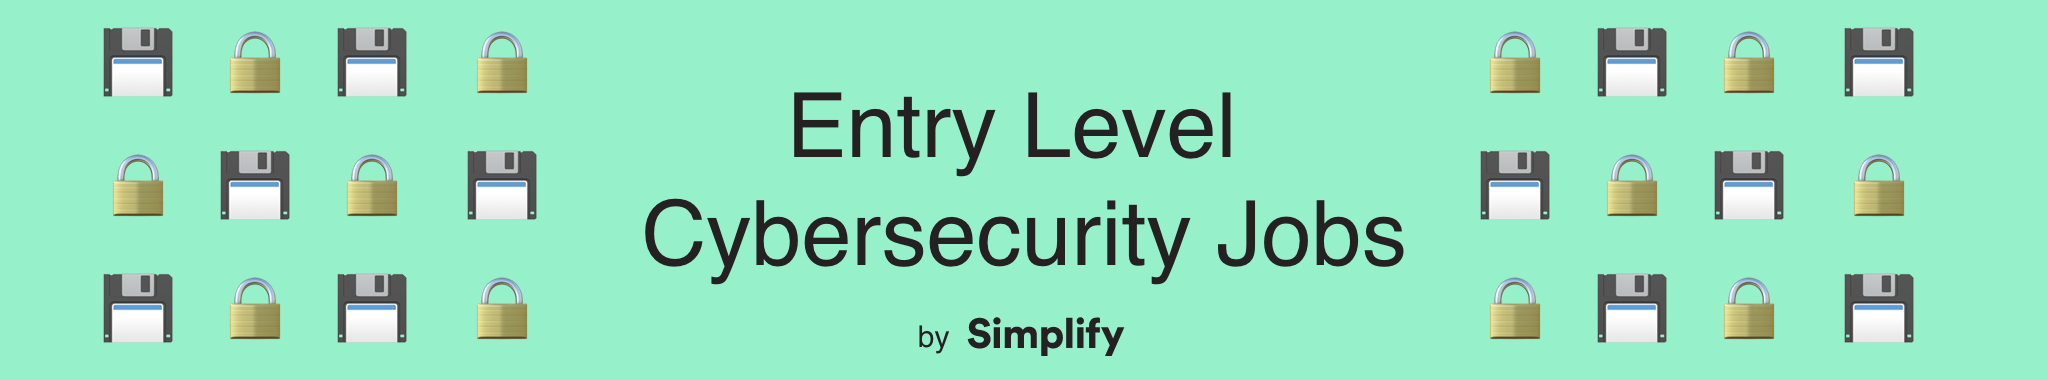 Top Entry Level Positions in Cyber Security